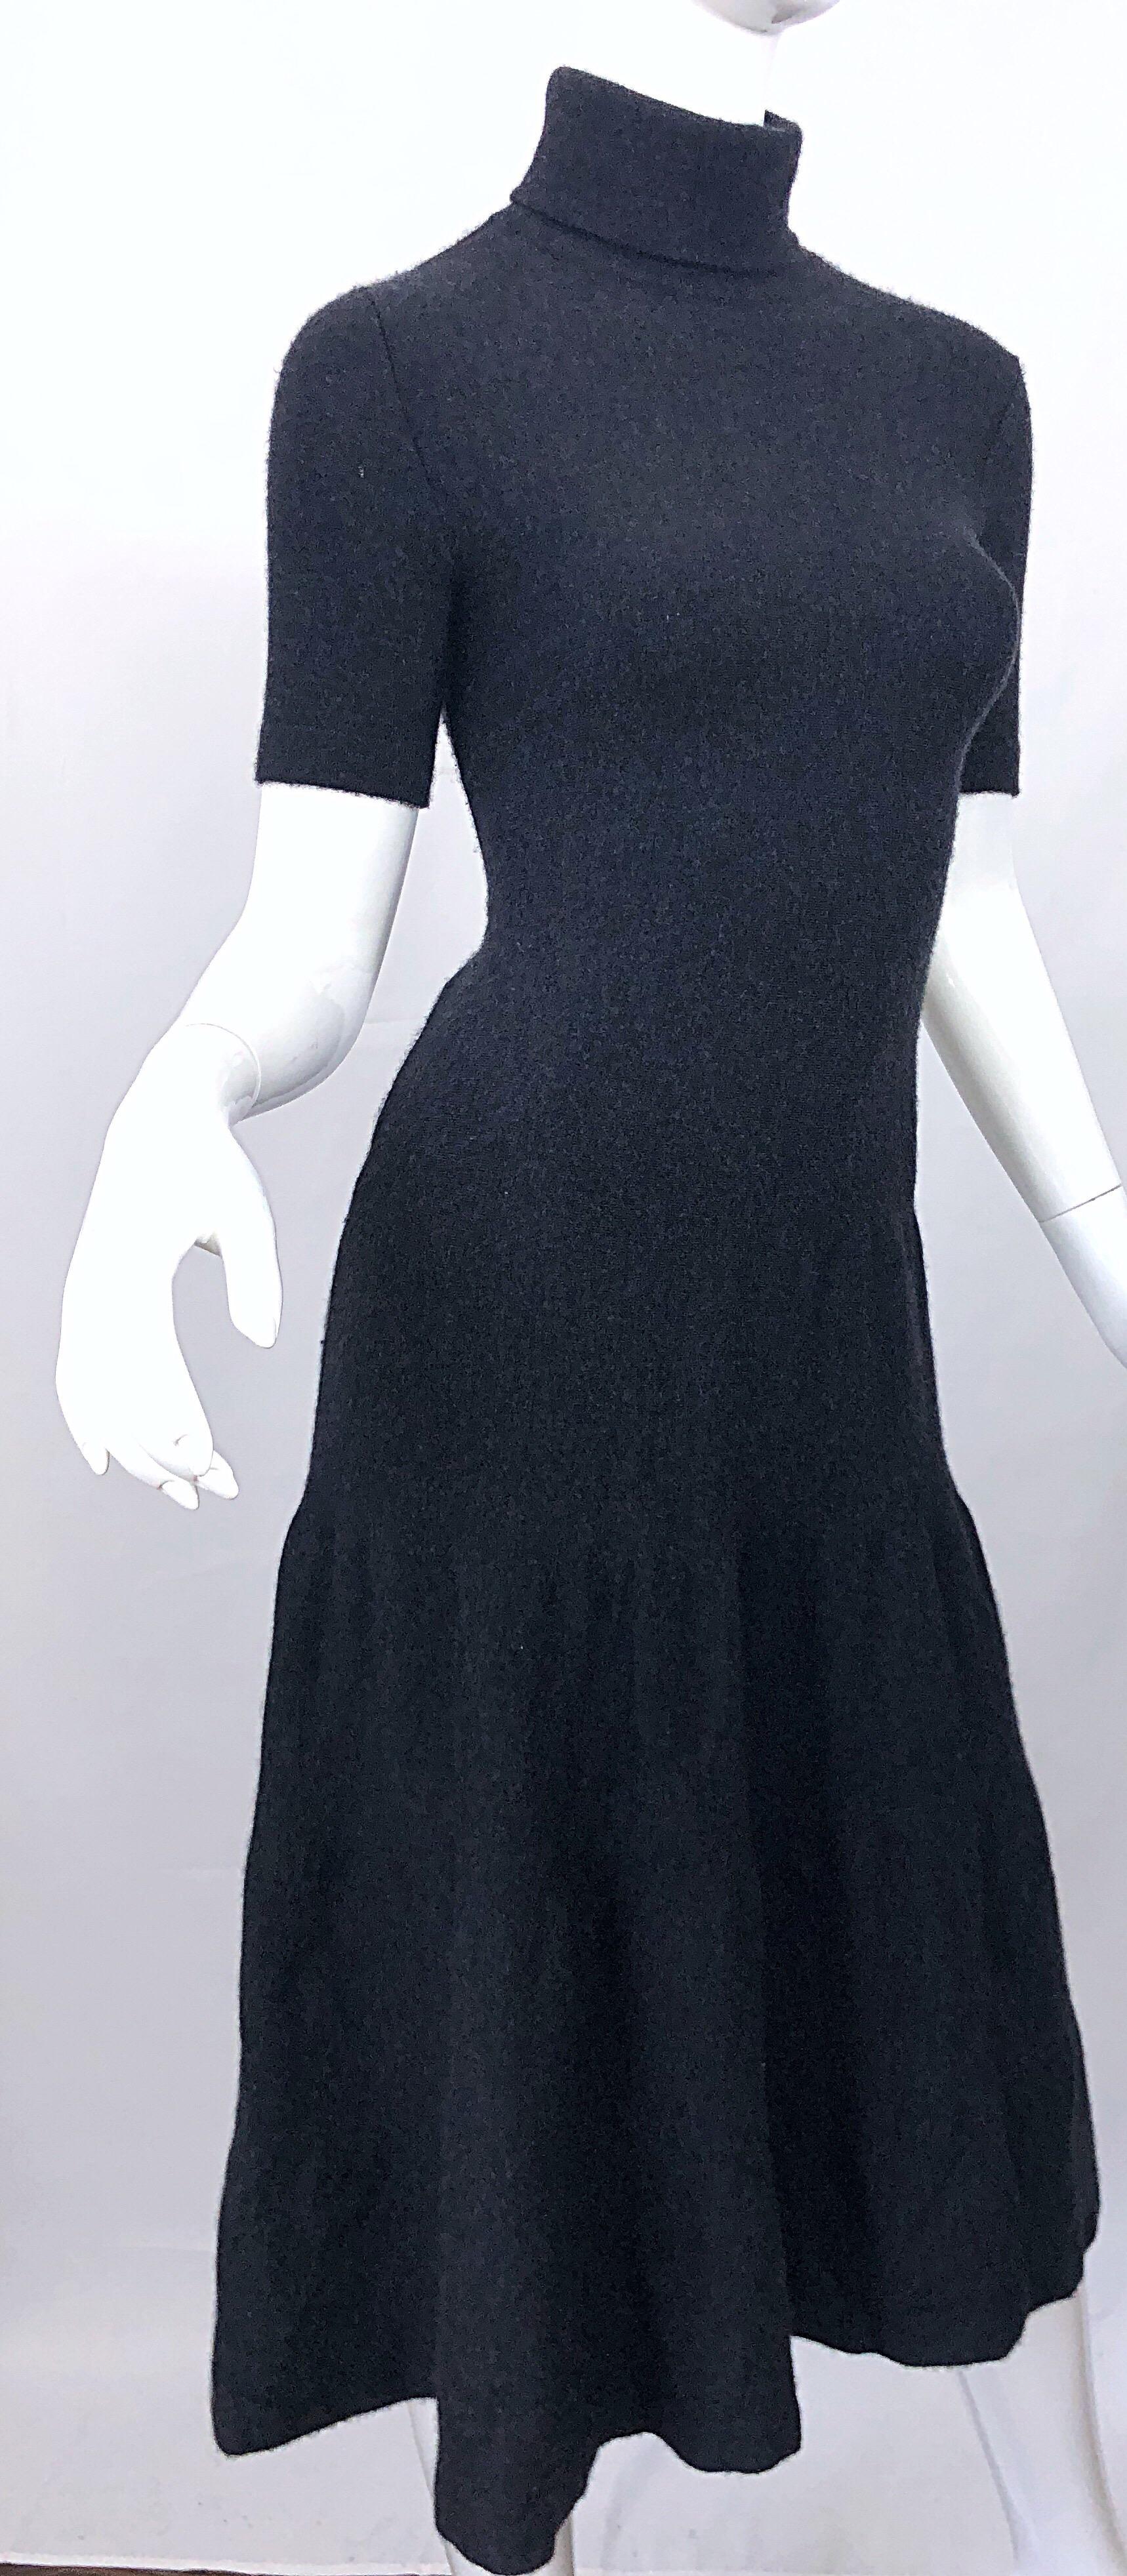 Vintage Ralph Lauren Collection Purple Label Cashmere Gray Short Sleeve Dress In Good Condition For Sale In San Diego, CA